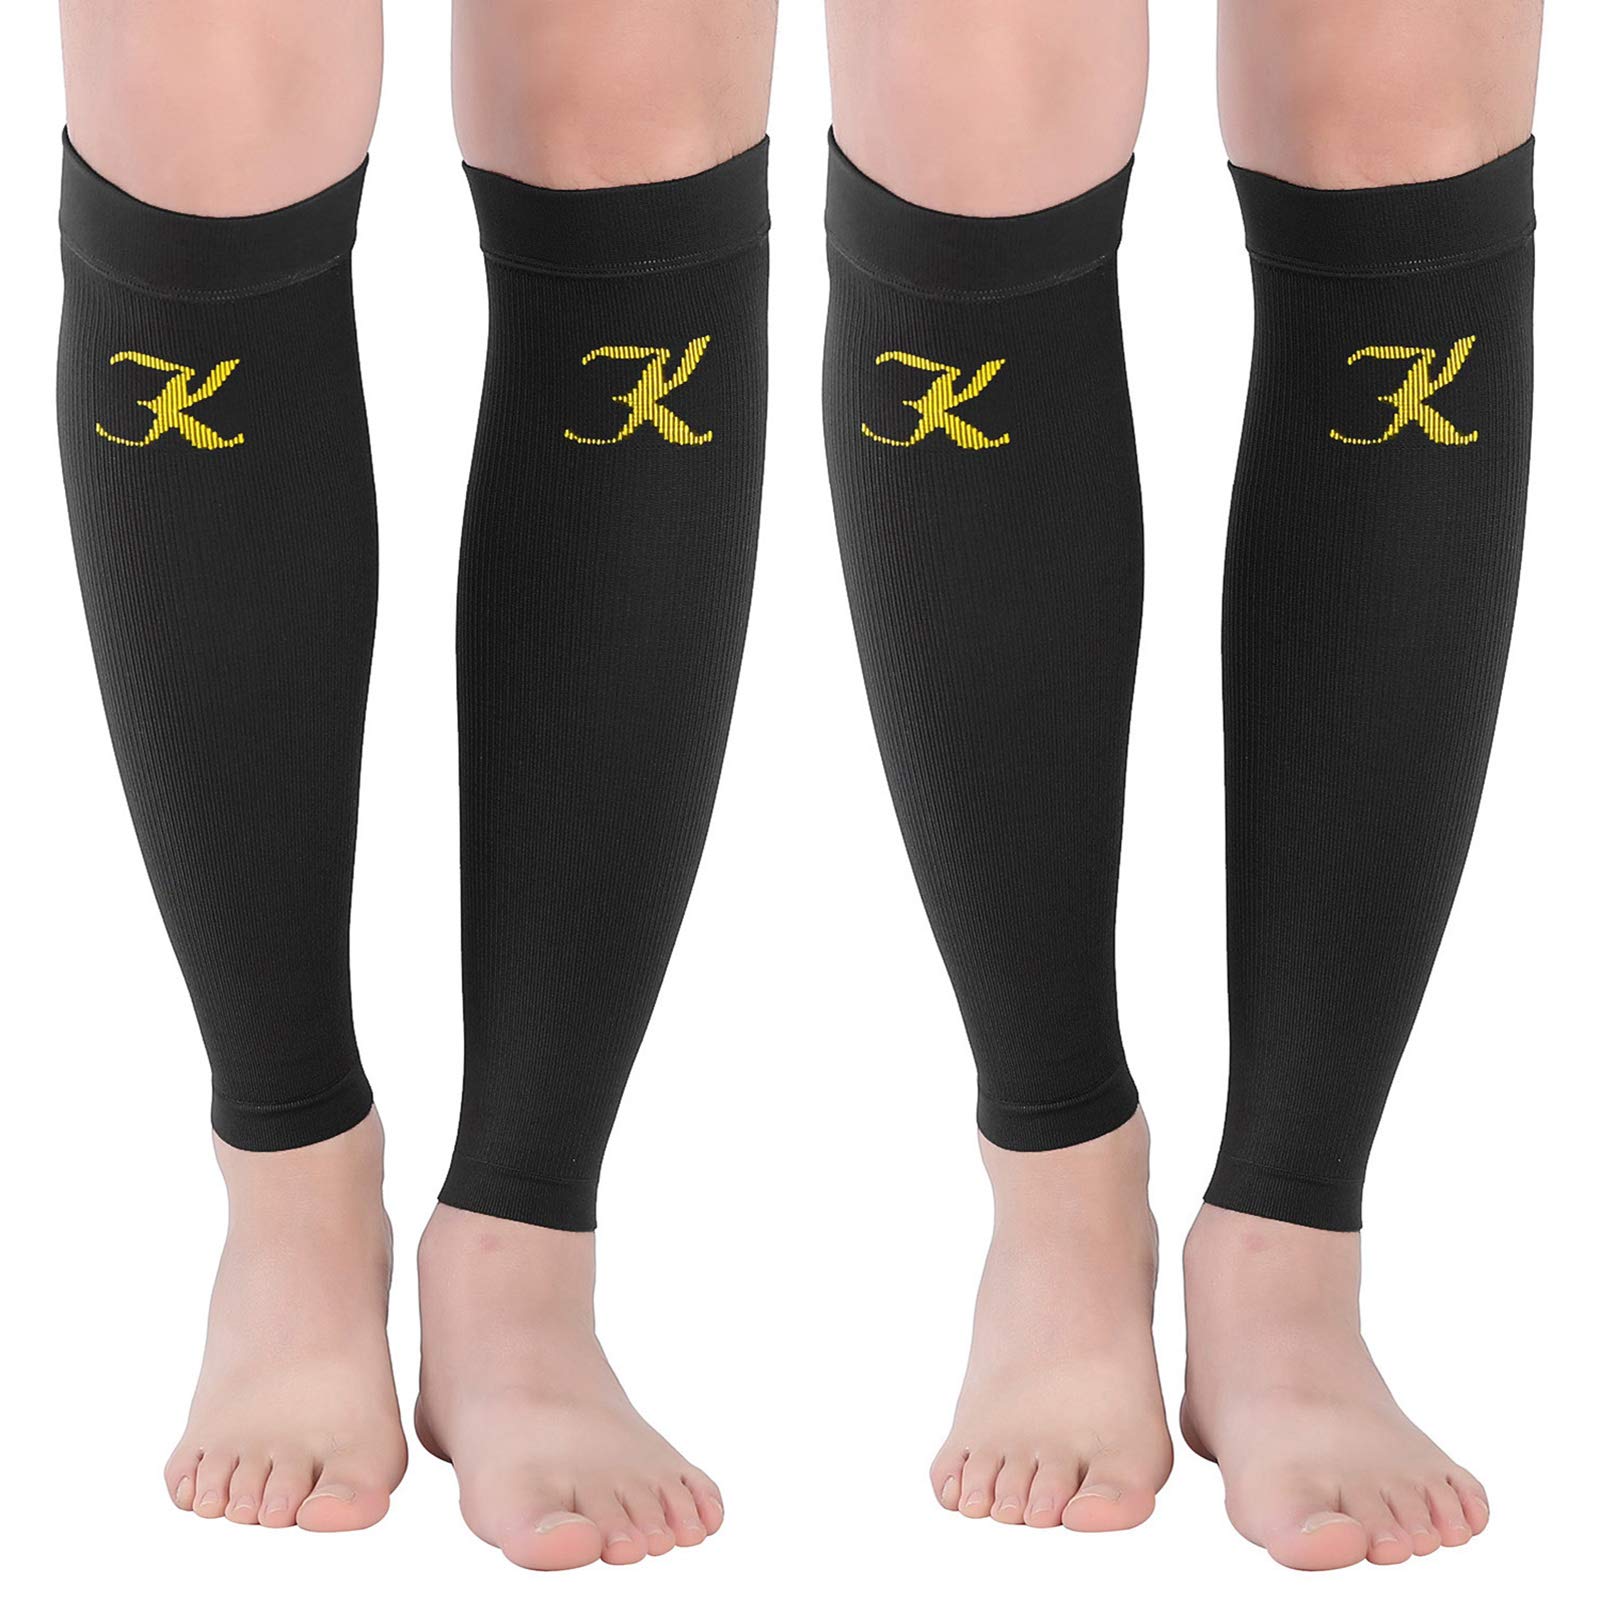 1Pair Compression Calf Sleeves (20-30mmHg) for Men & Women